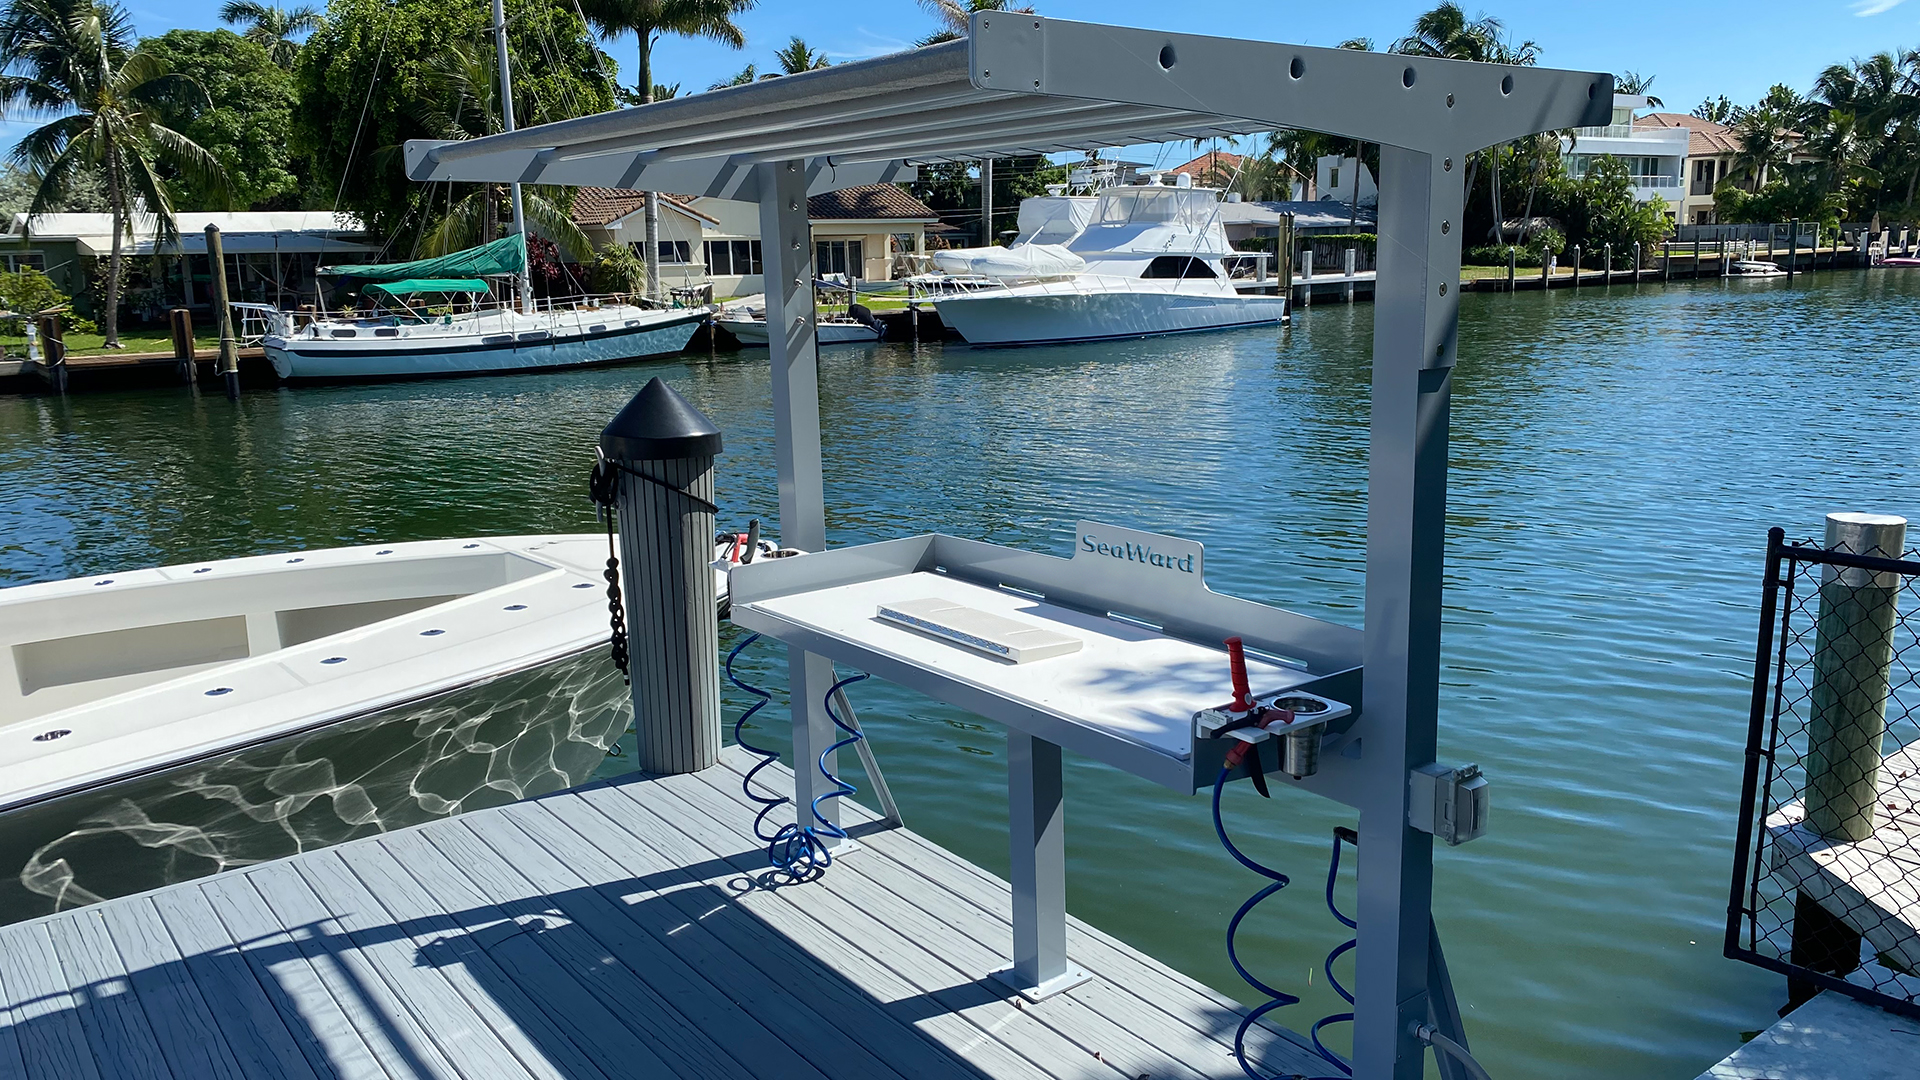 The Best Fish Cleaning Station installed on your dock